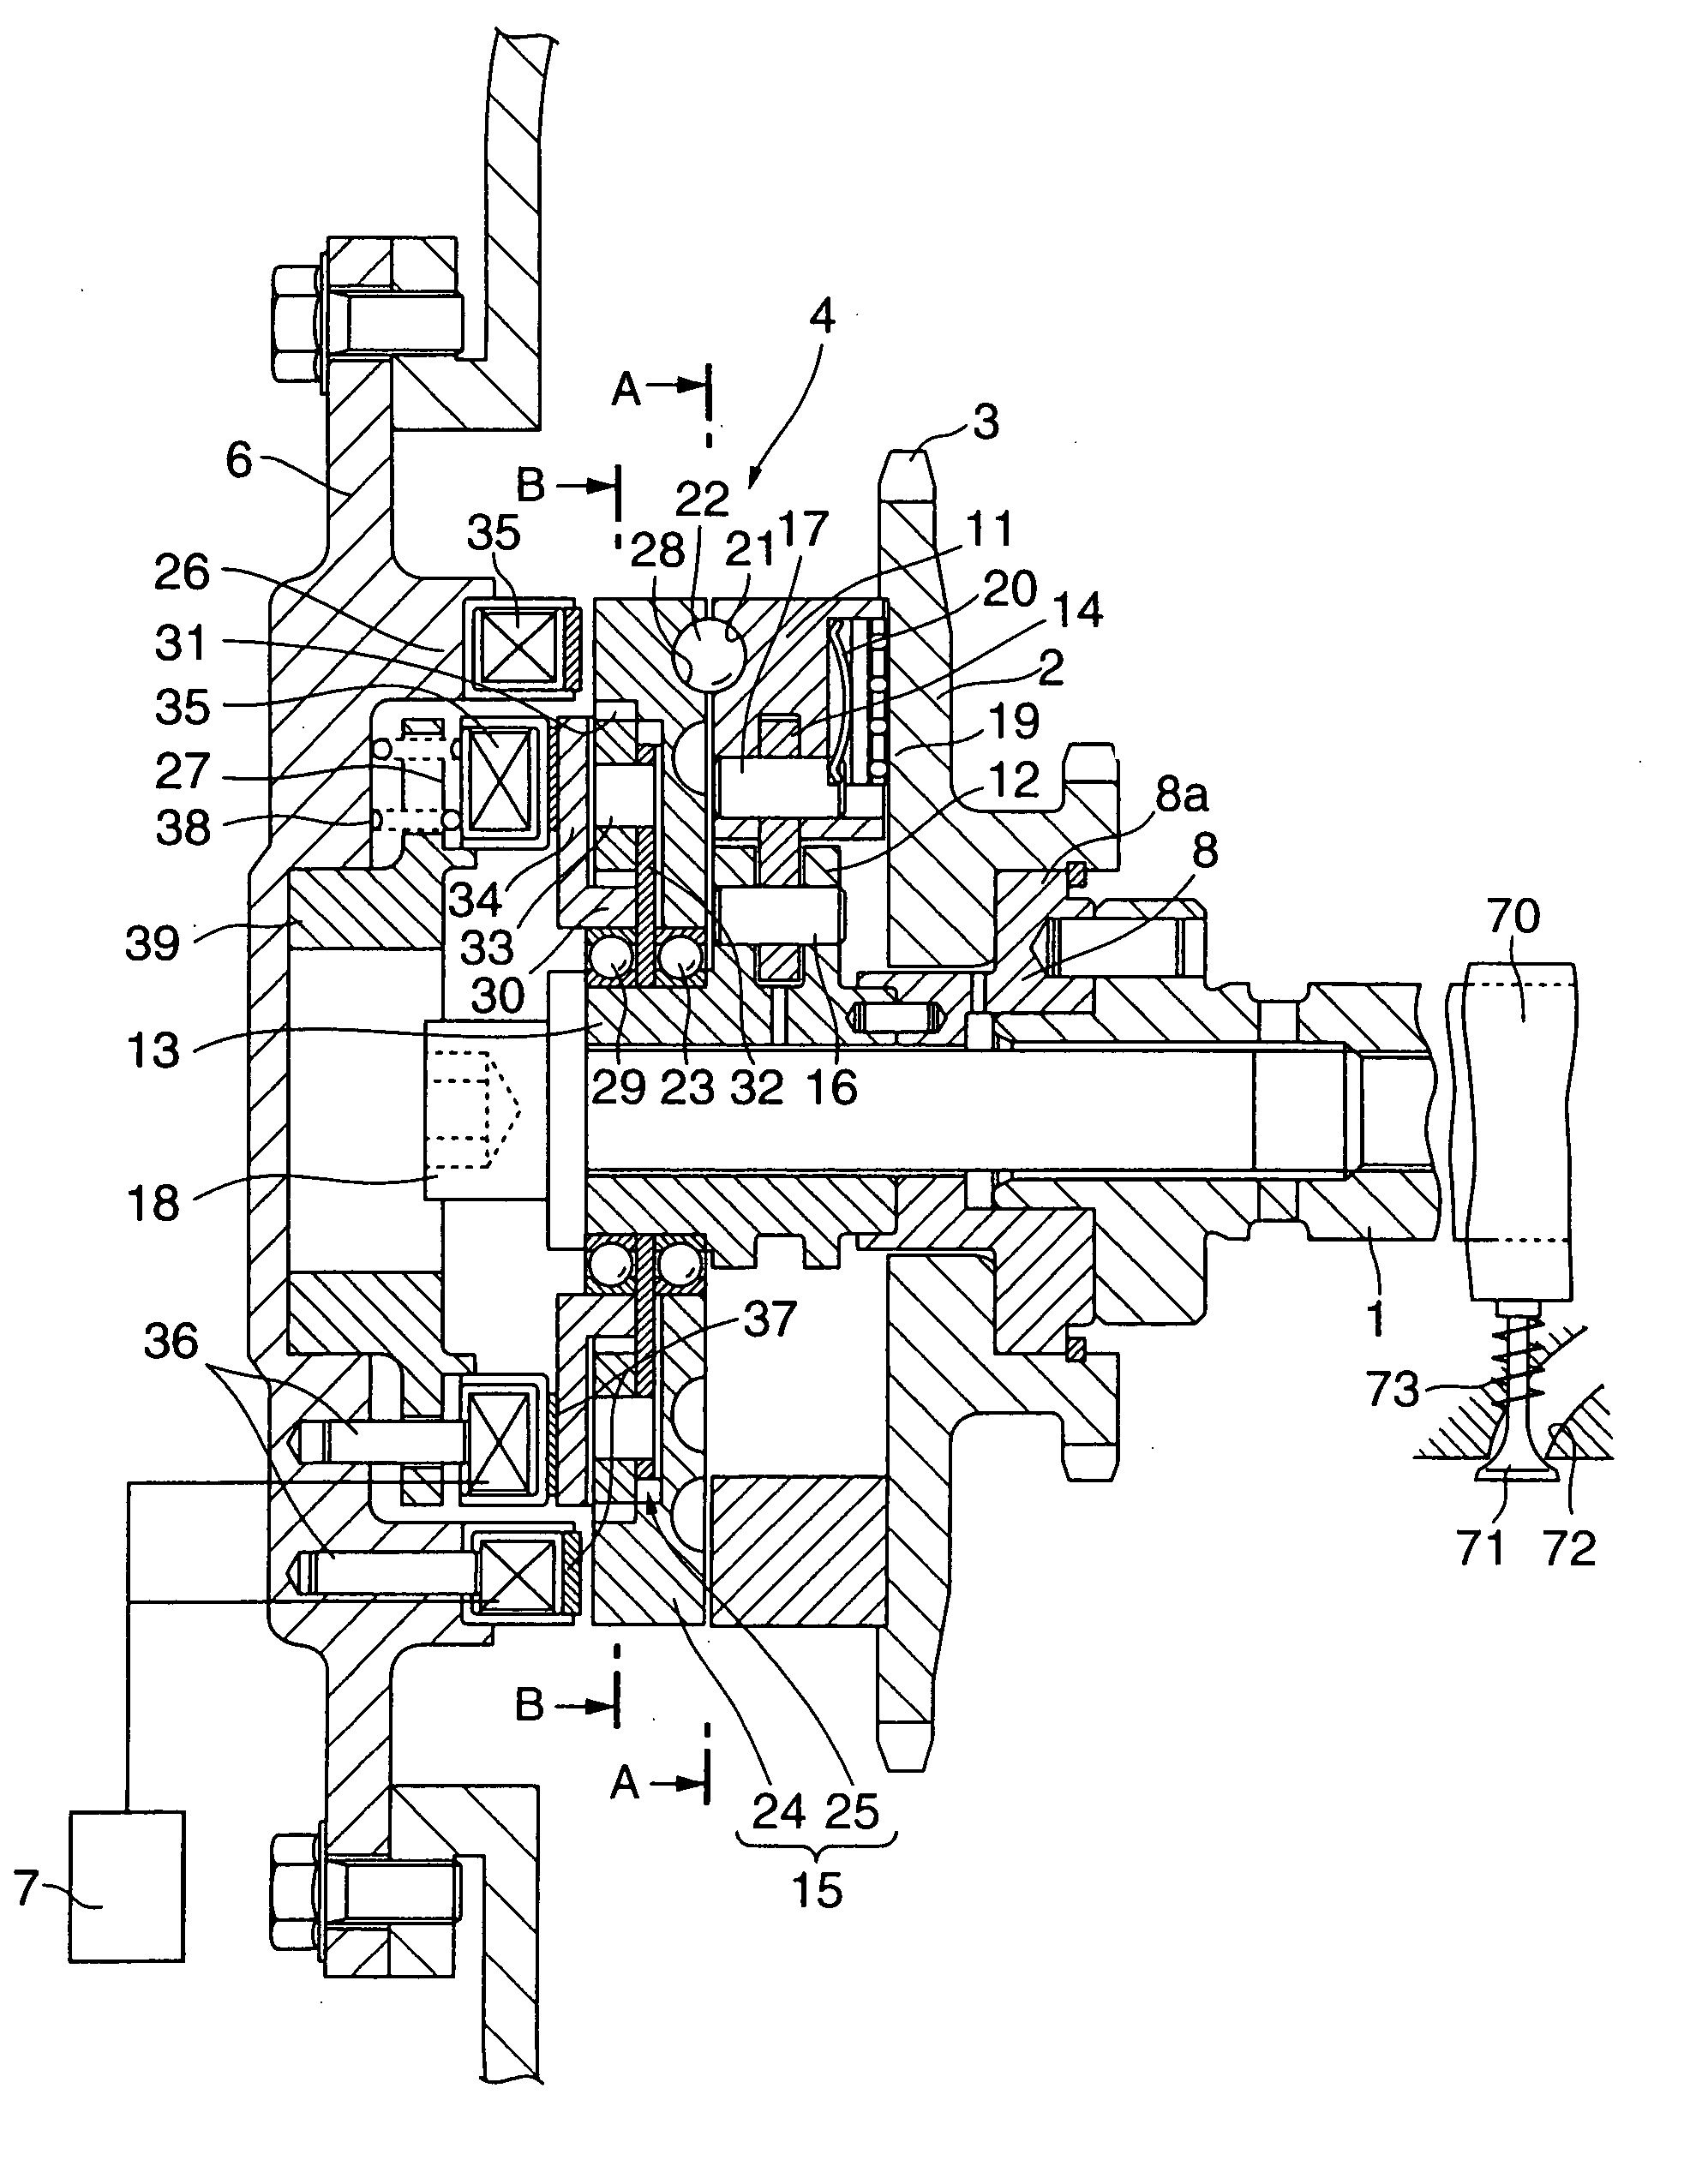 Valve timing control device for internal combustion engine